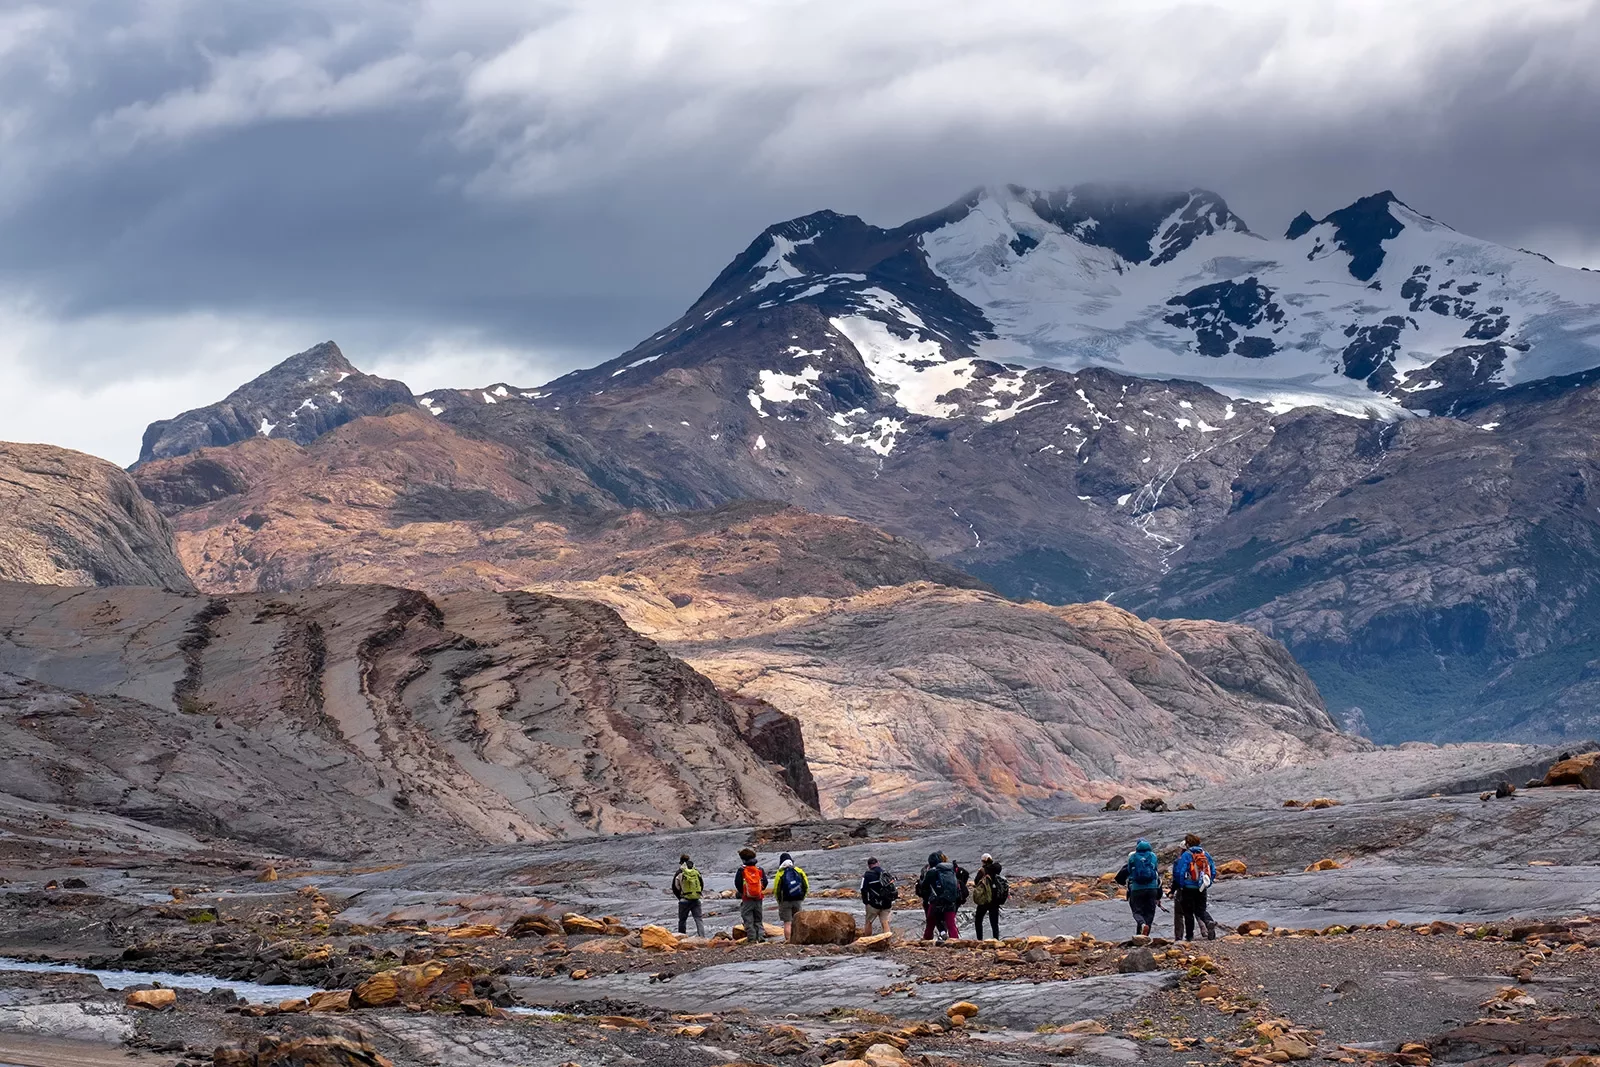 Group of guests walking among arid mountain range, snowy peaks in distance.